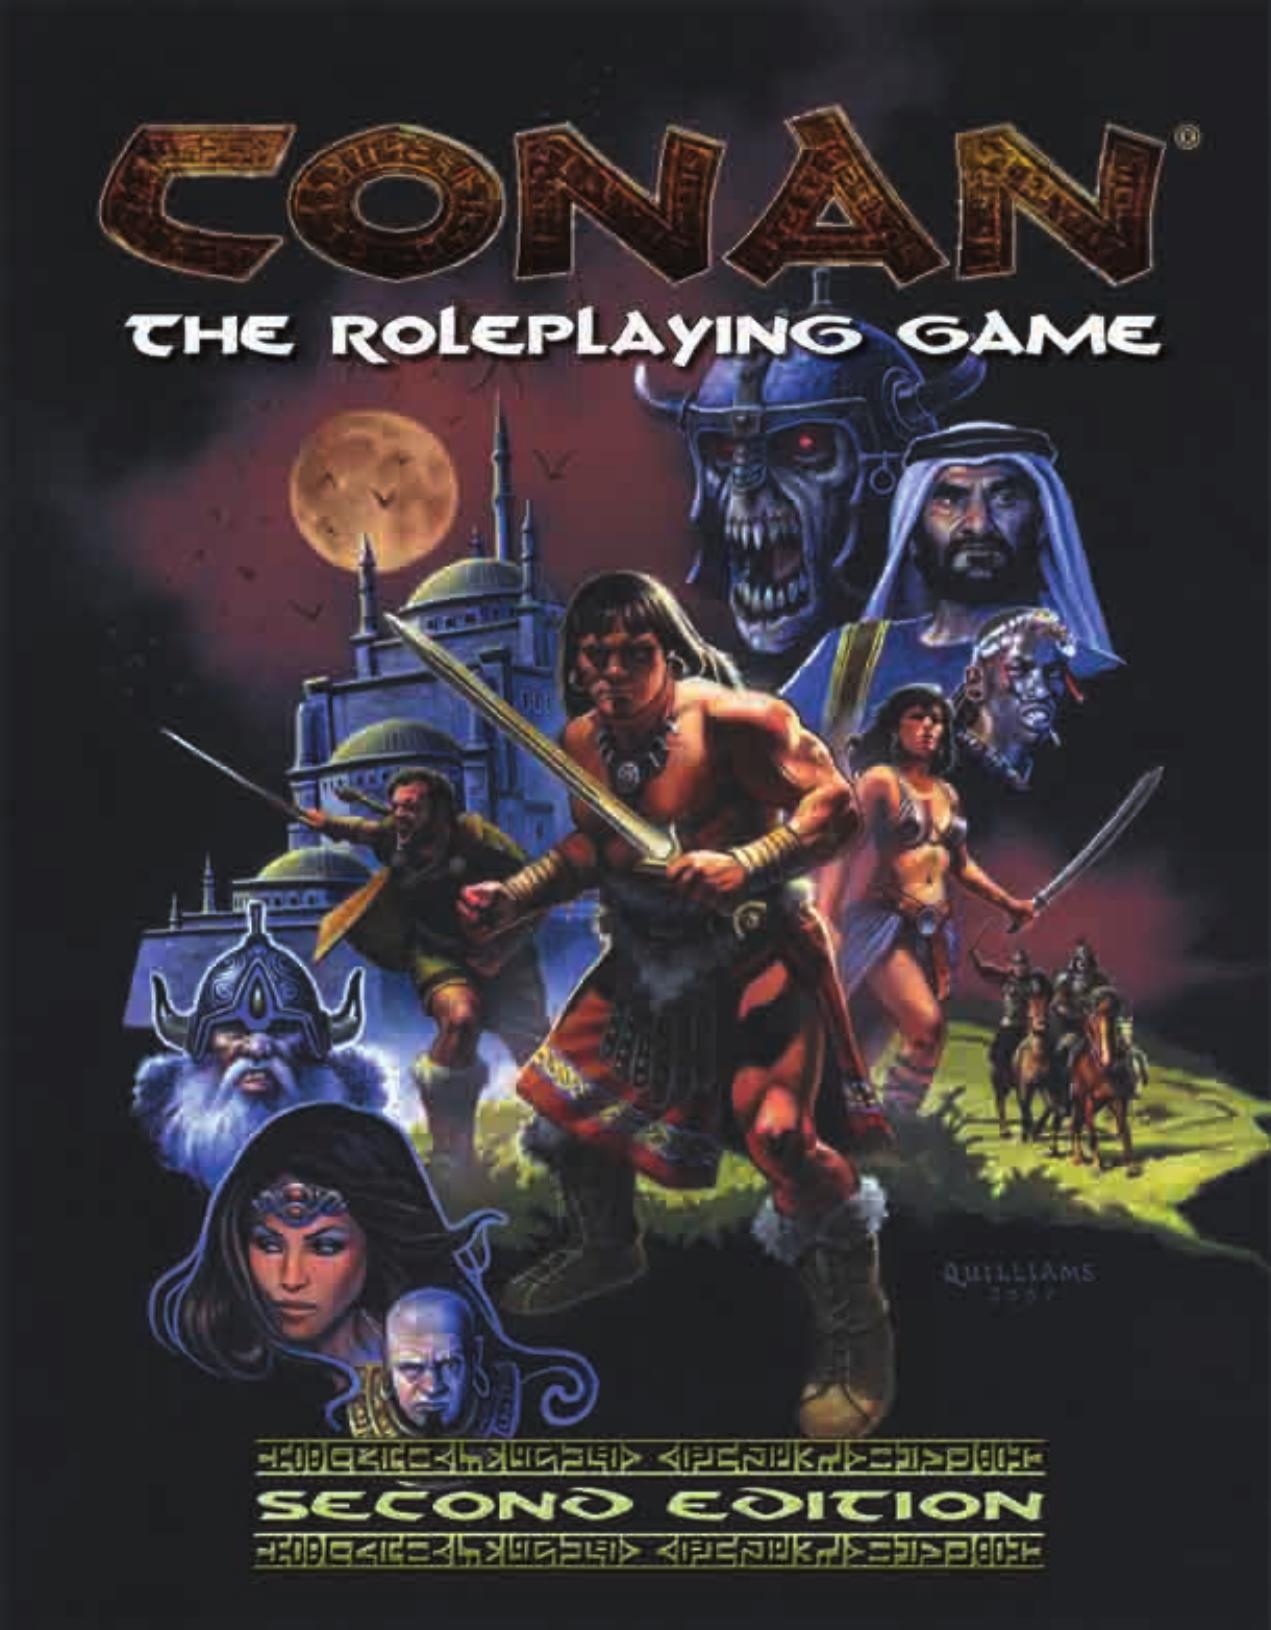 Conan the Roleplaying Games 2nd Edition